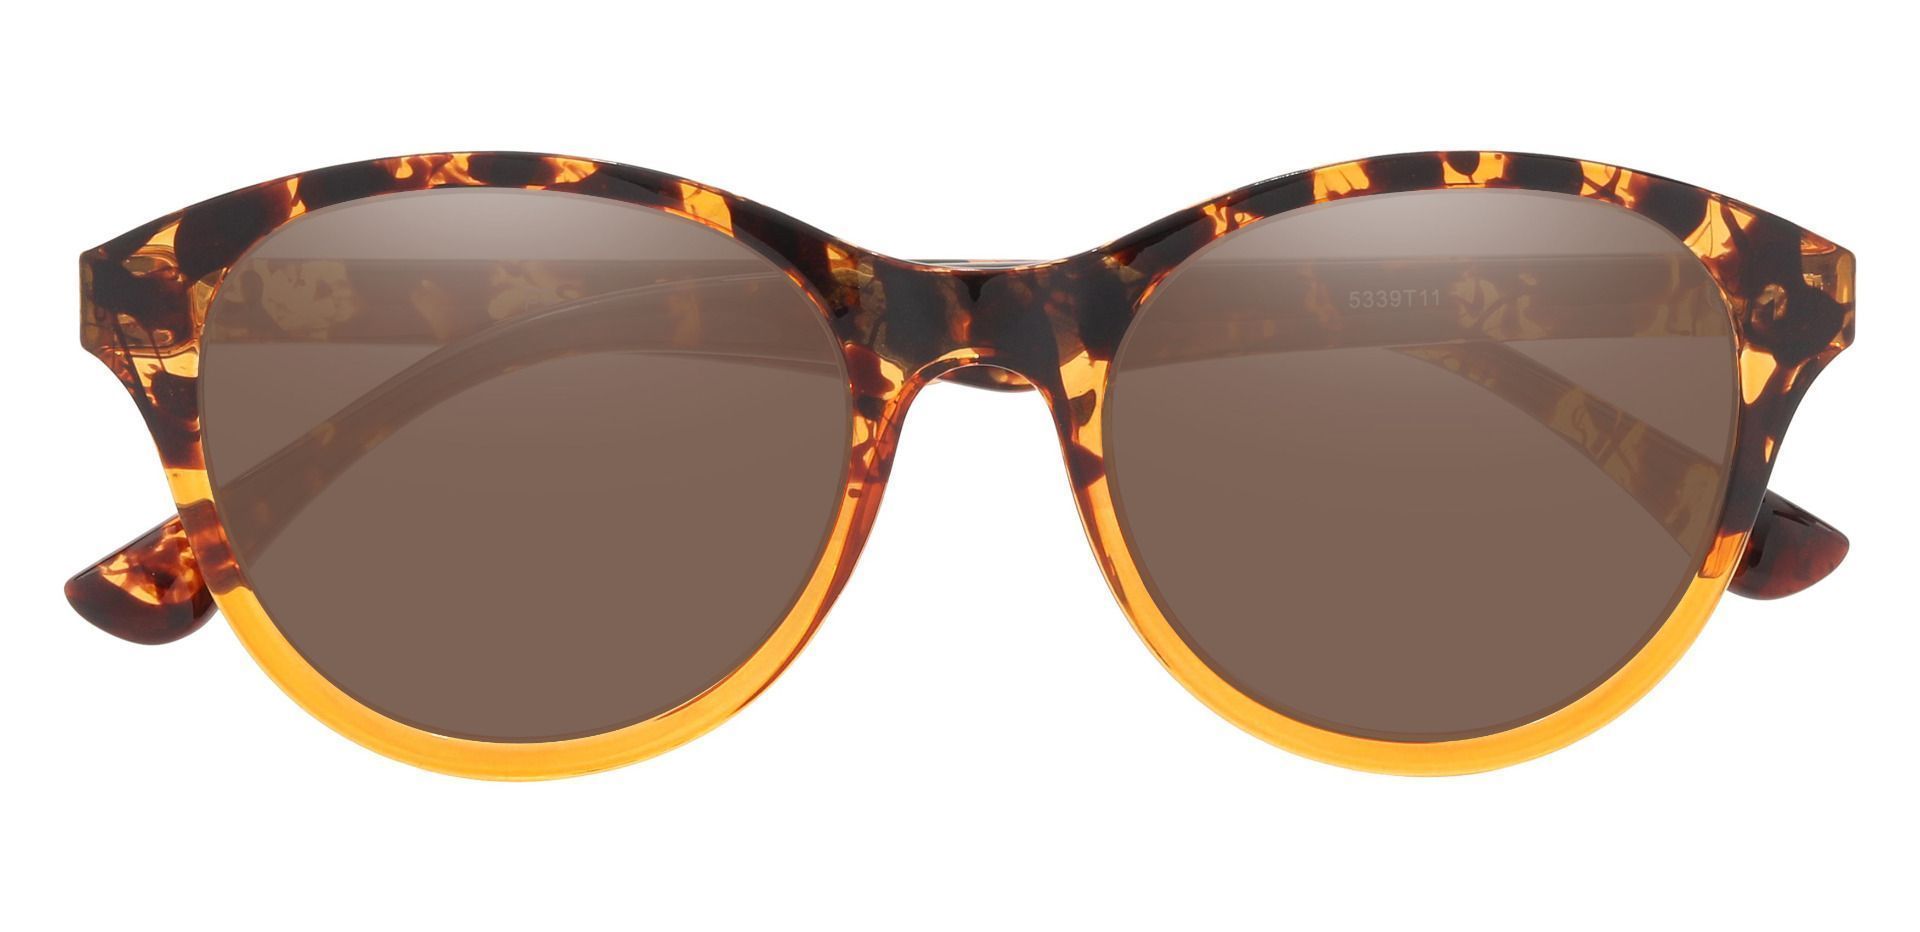 Angelina Round Prescription Sunglasses - Tortoise Frame With Brown Lenses